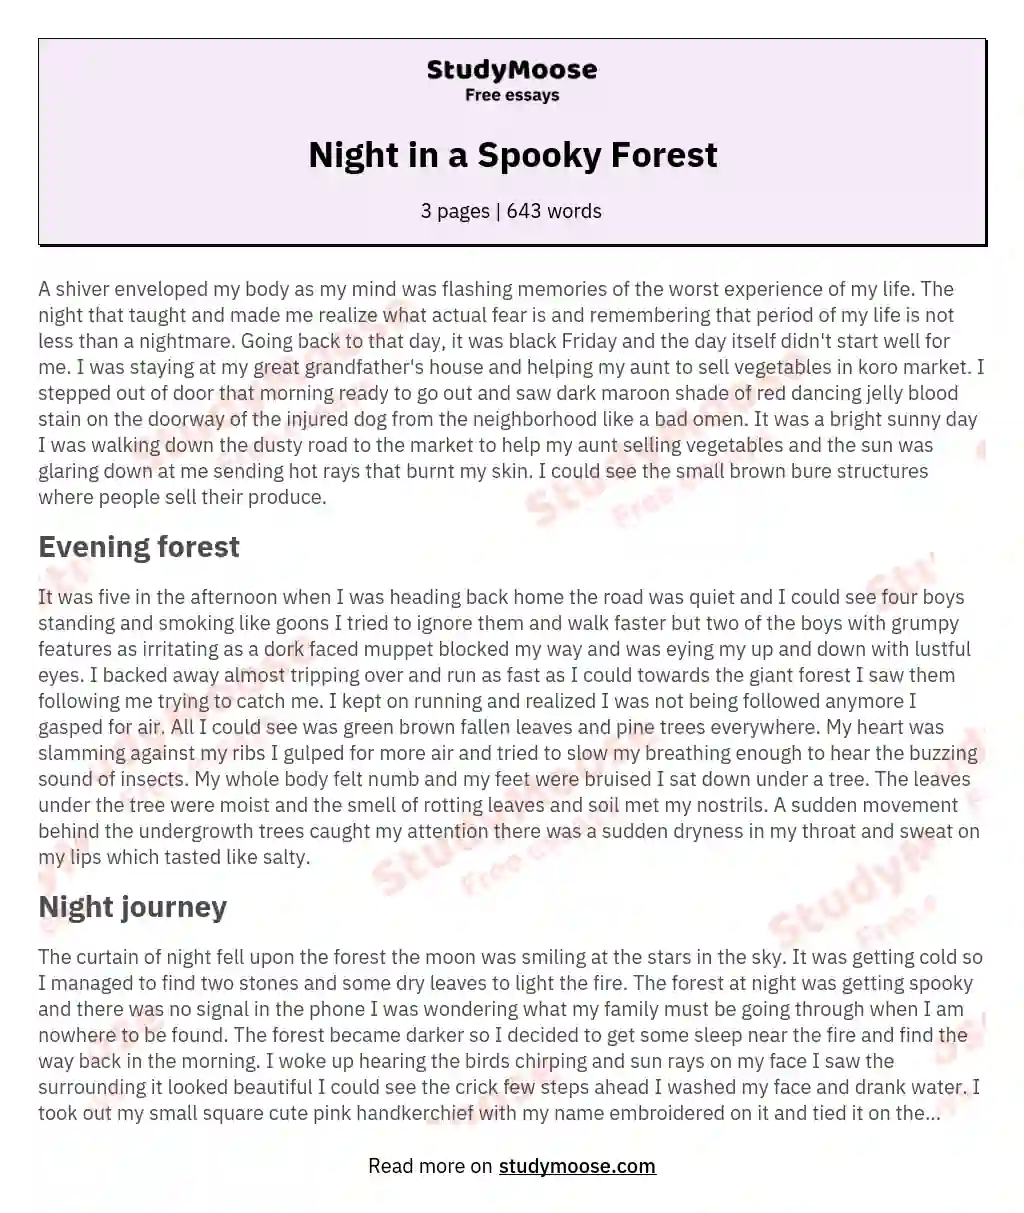 Night in a Spooky Forest essay